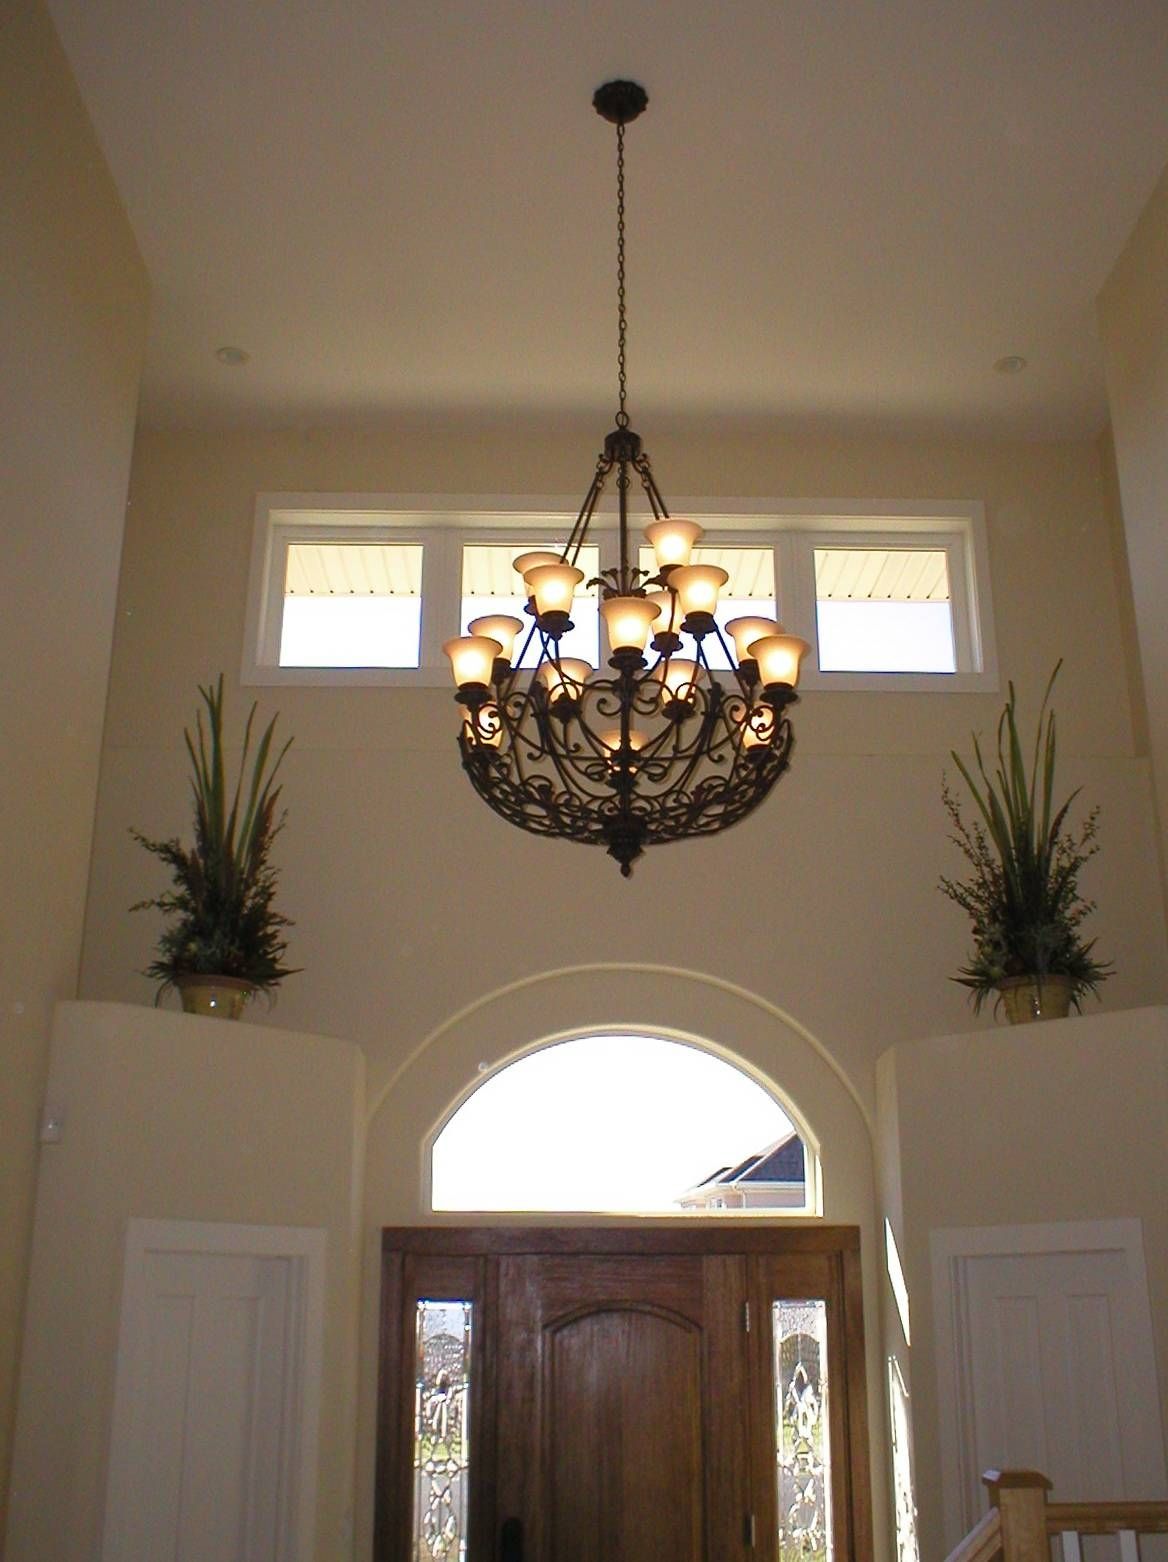 Railroad Era Pendant Lighting For High Ceiling Kitchens Blog Inside Pendant Lights For High Ceilings (View 14 of 15)